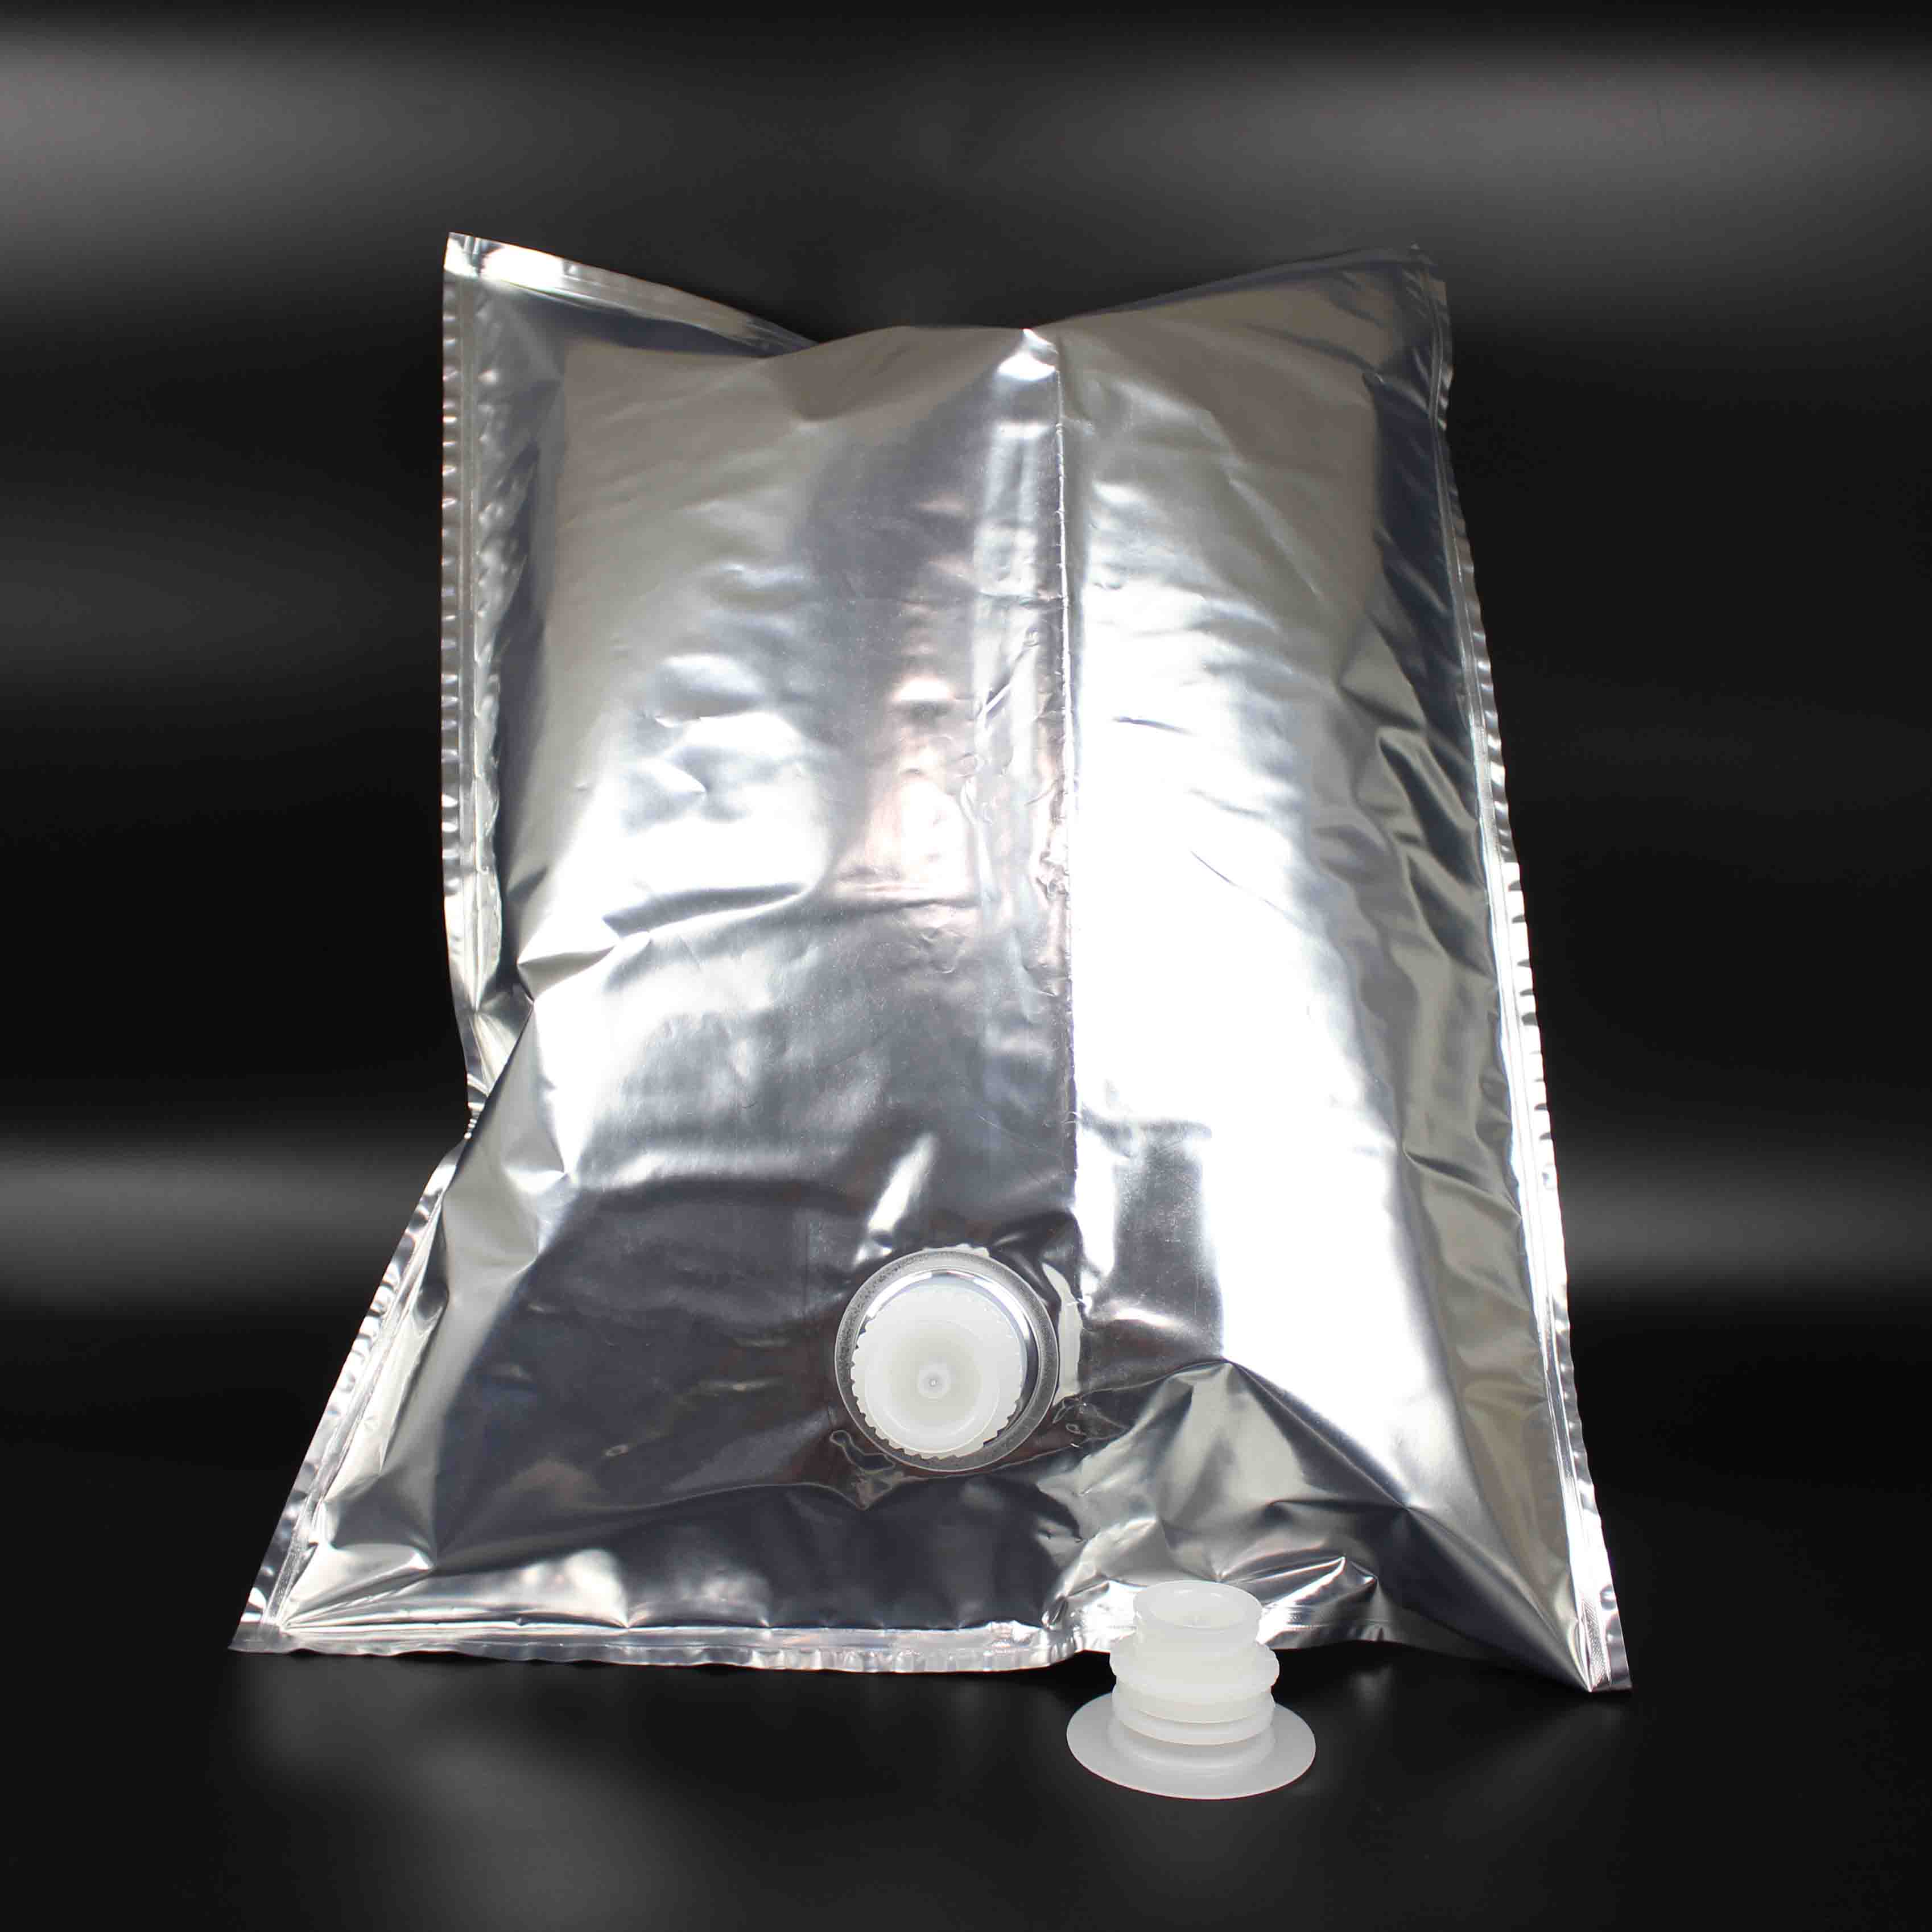 BIB Bag in box for Syrup packaging